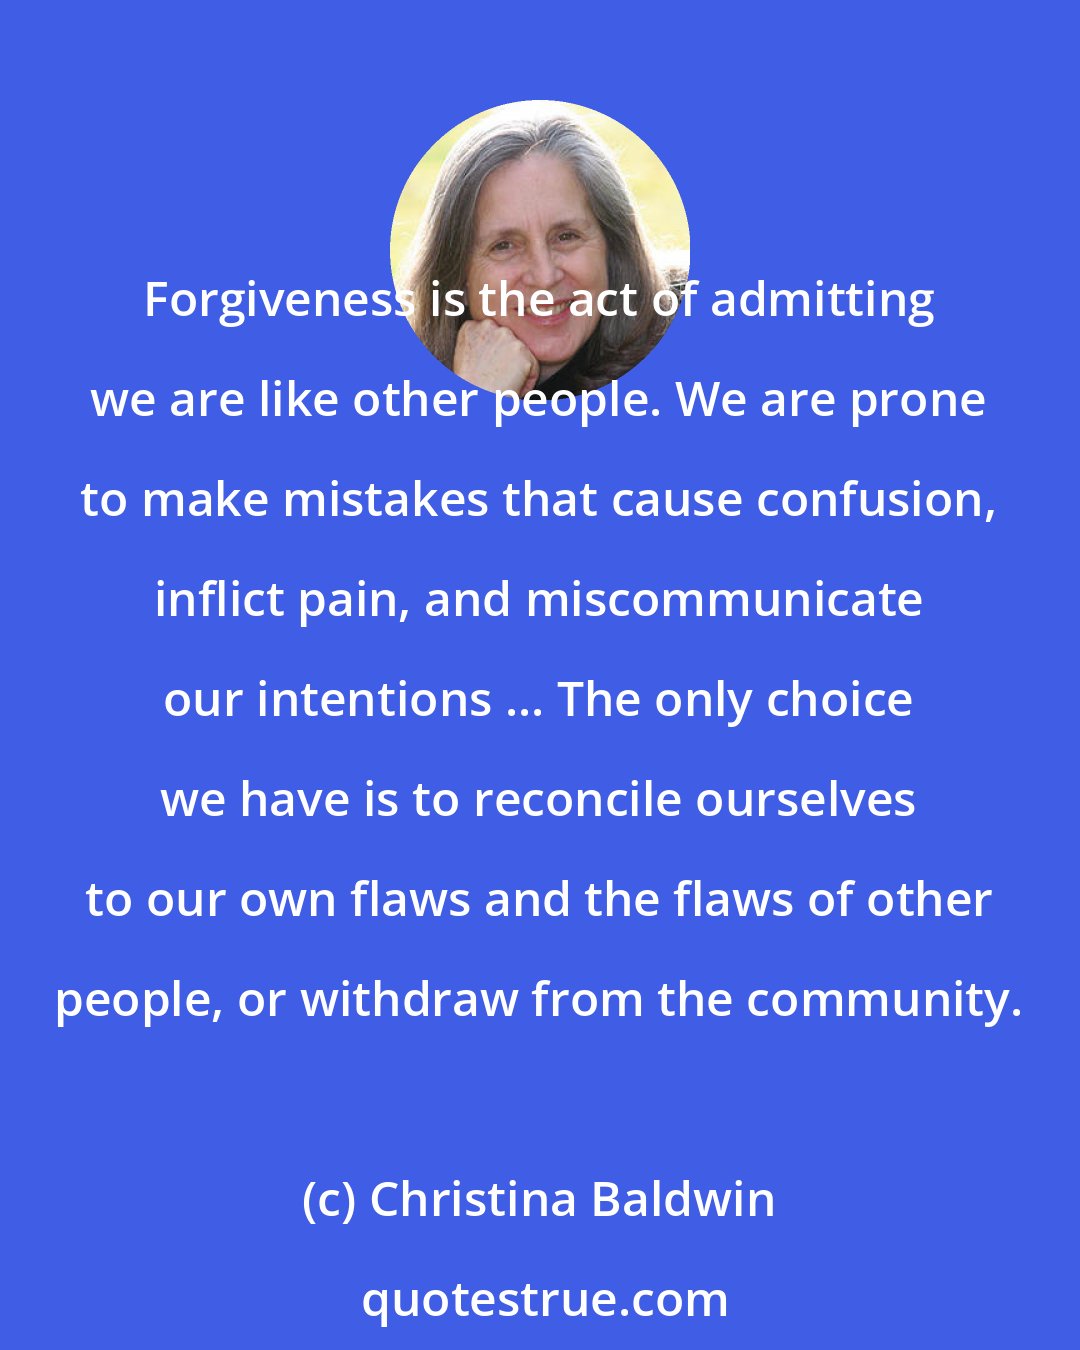 Christina Baldwin: Forgiveness is the act of admitting we are like other people. We are prone to make mistakes that cause confusion, inflict pain, and miscommunicate our intentions ... The only choice we have is to reconcile ourselves to our own flaws and the flaws of other people, or withdraw from the community.